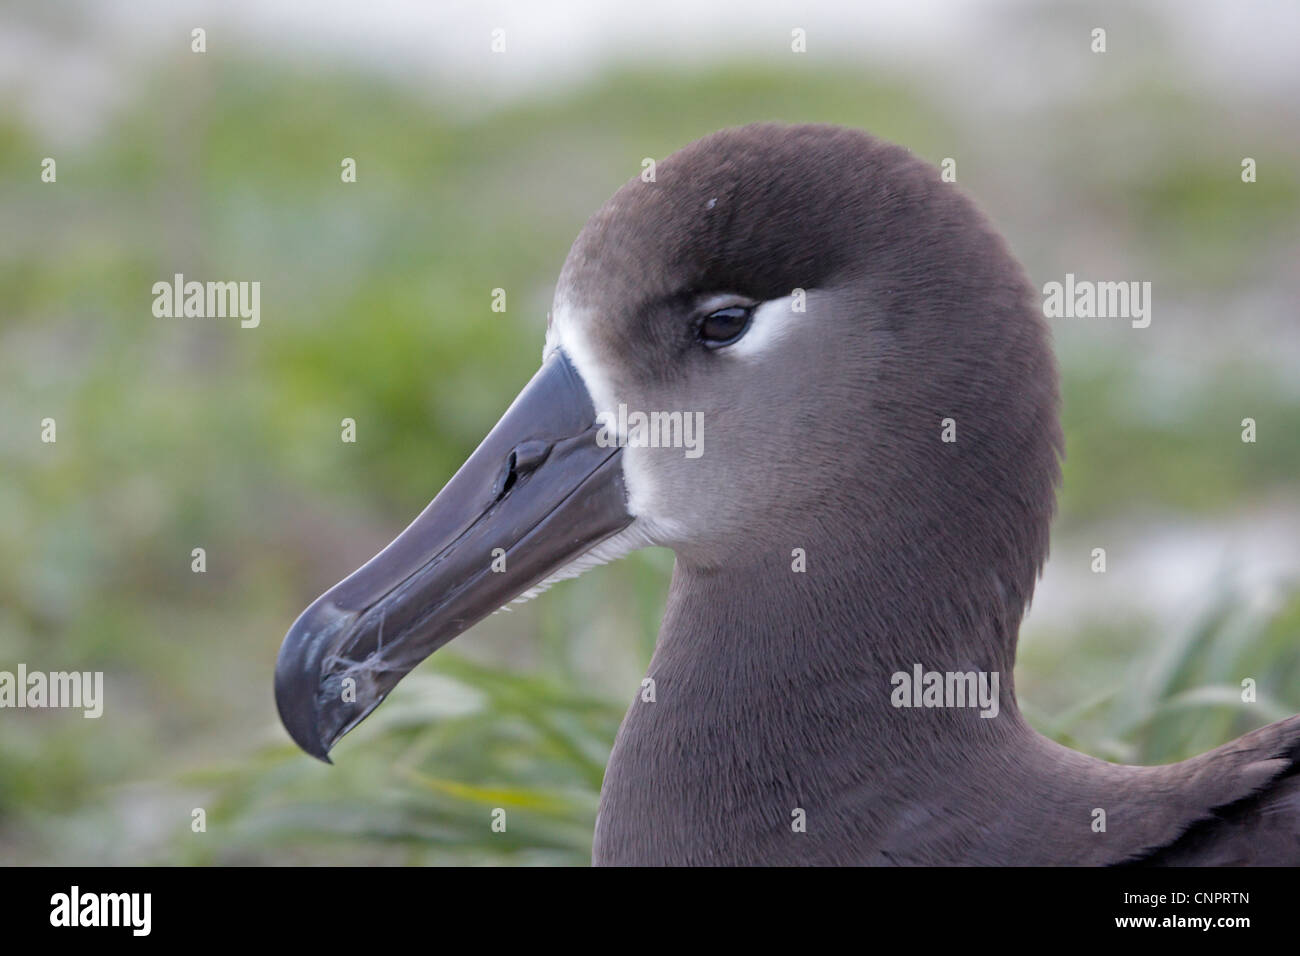 Head shot of a Black-footed Albatross Stock Photo